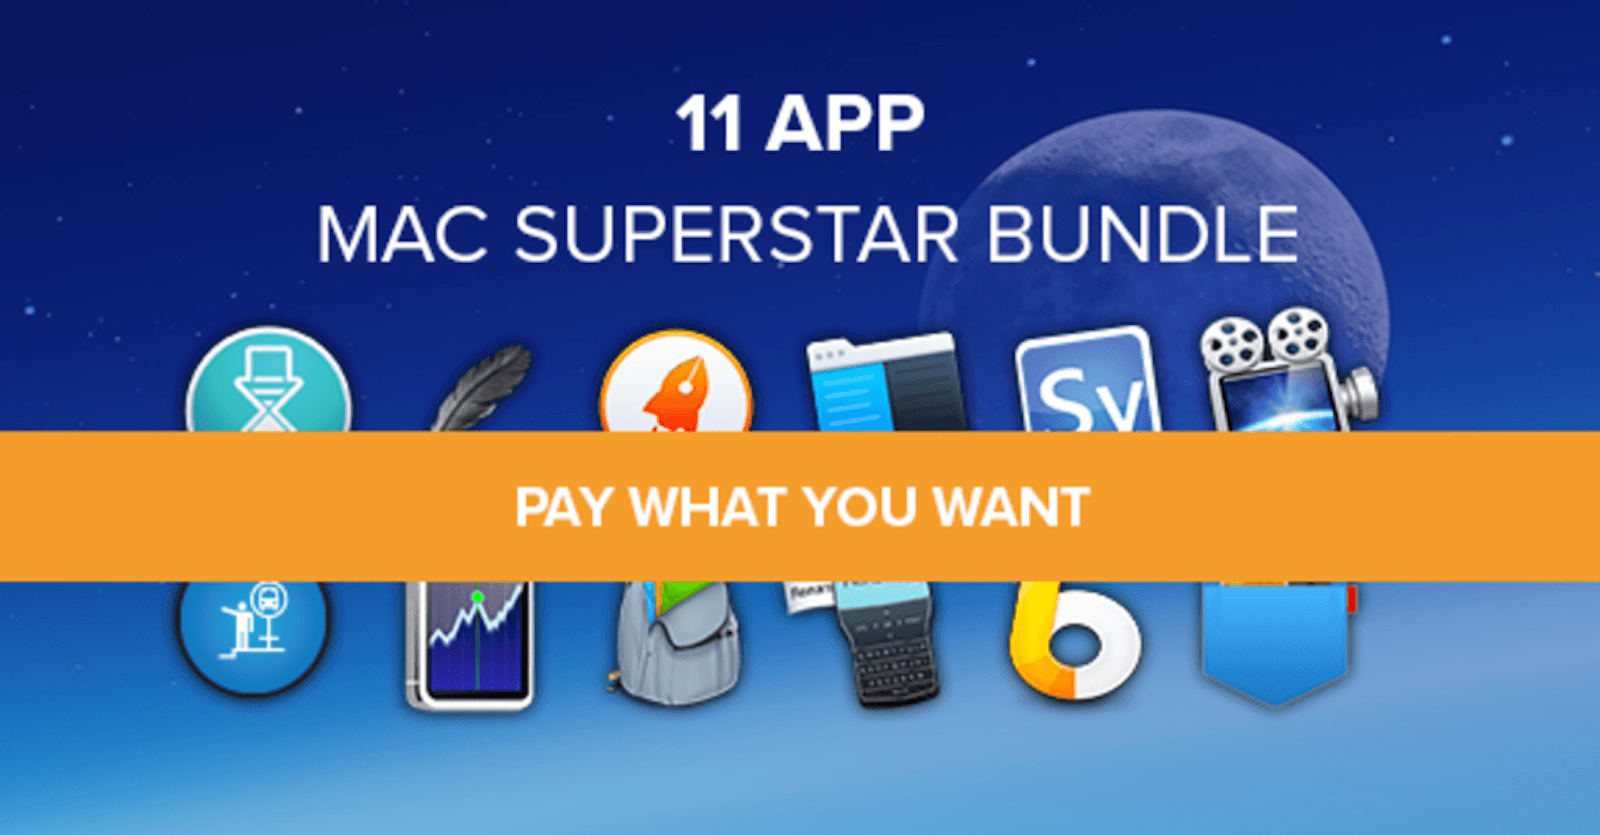 Name your price for this bundle of twelve productivity-boosting apps.